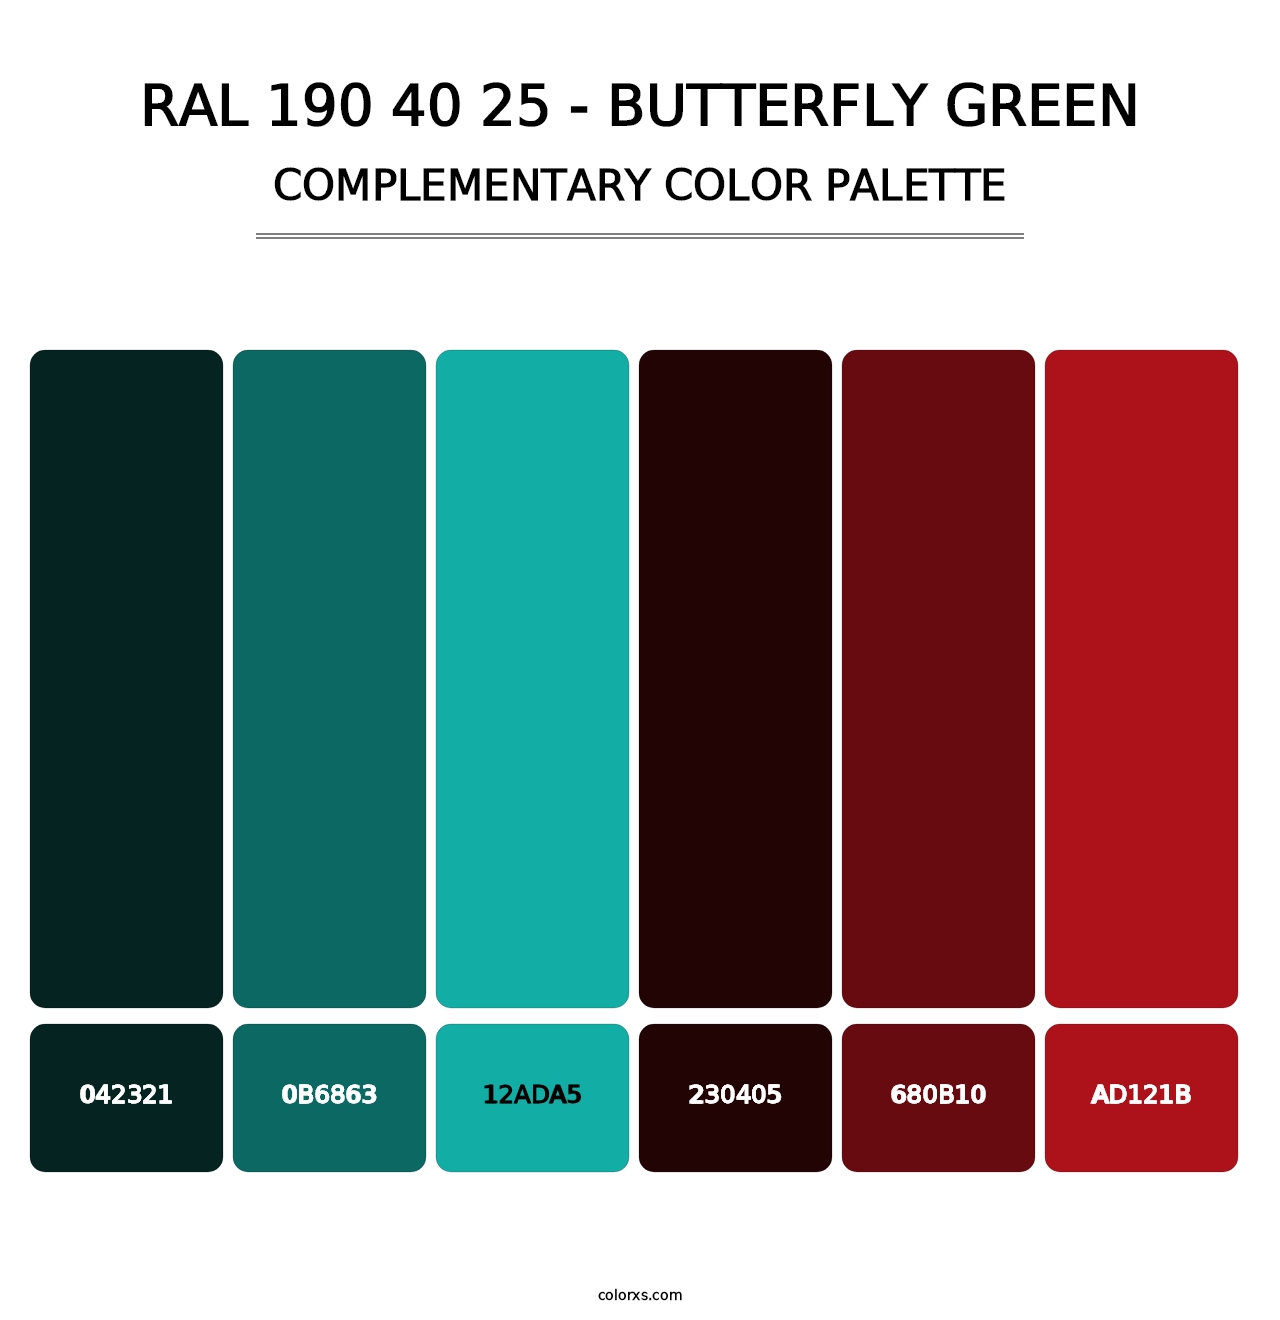 RAL 190 40 25 - Butterfly Green - Complementary Color Palette